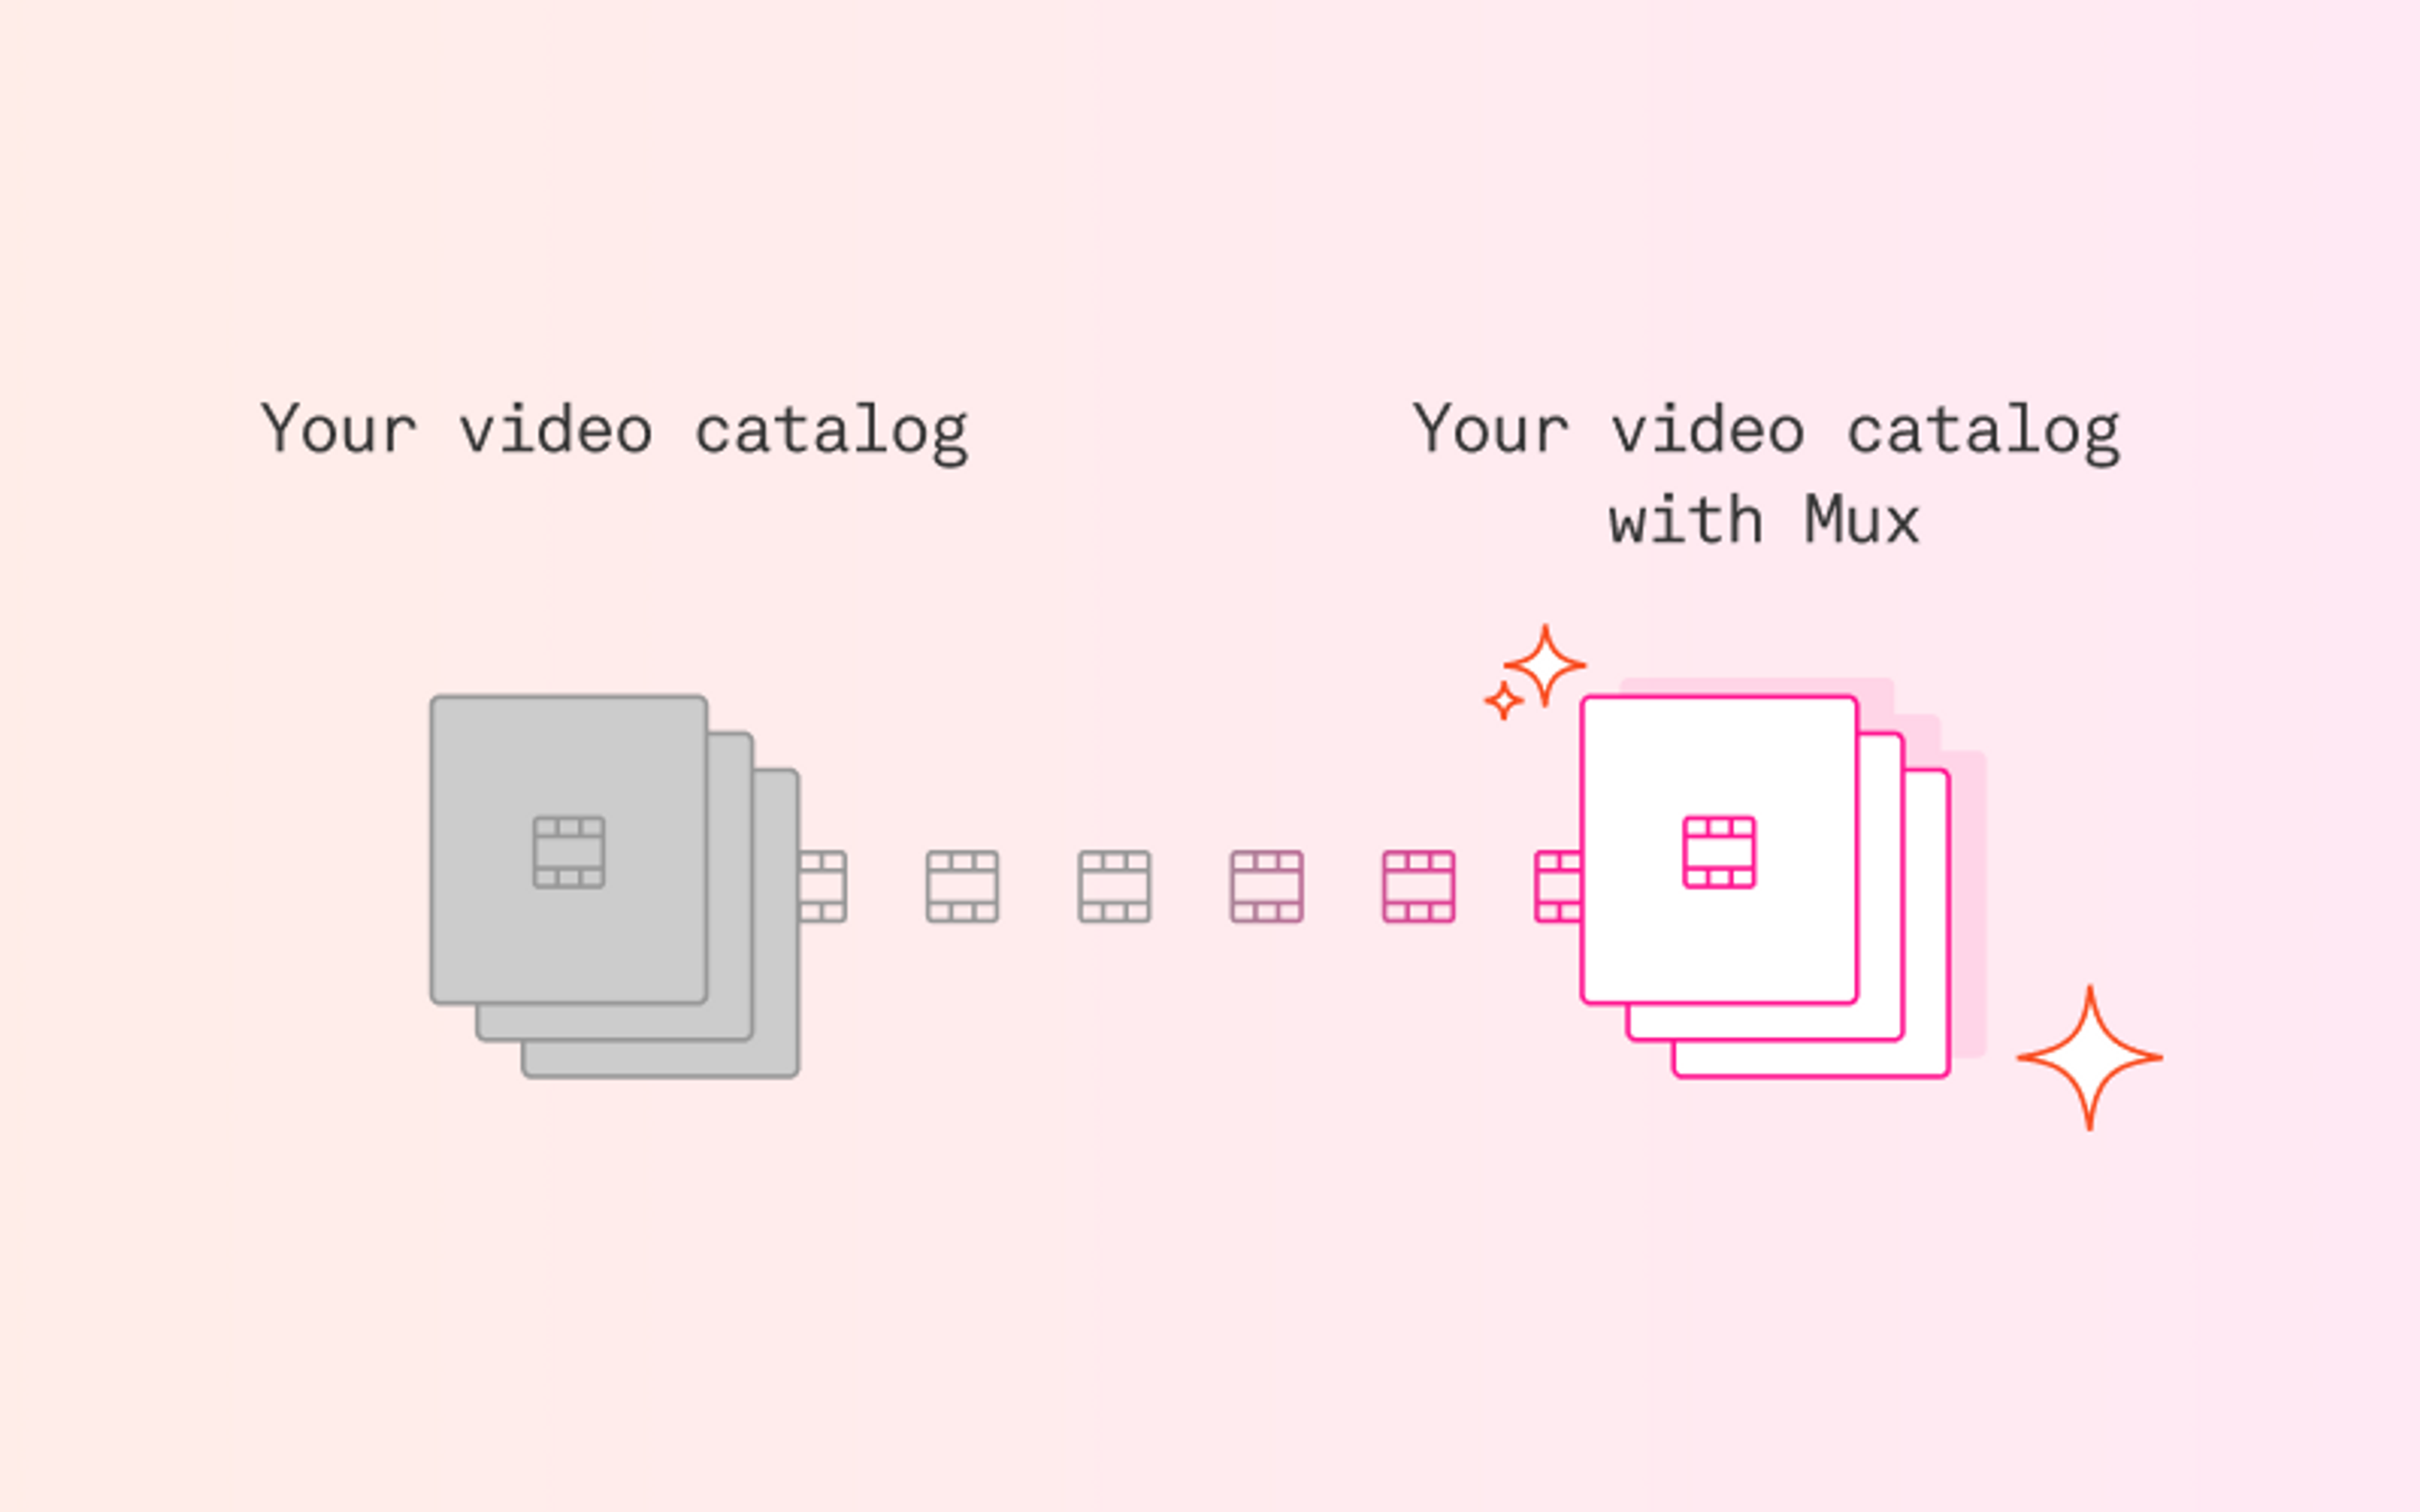 There’s never been a better time to migrate your video catalog